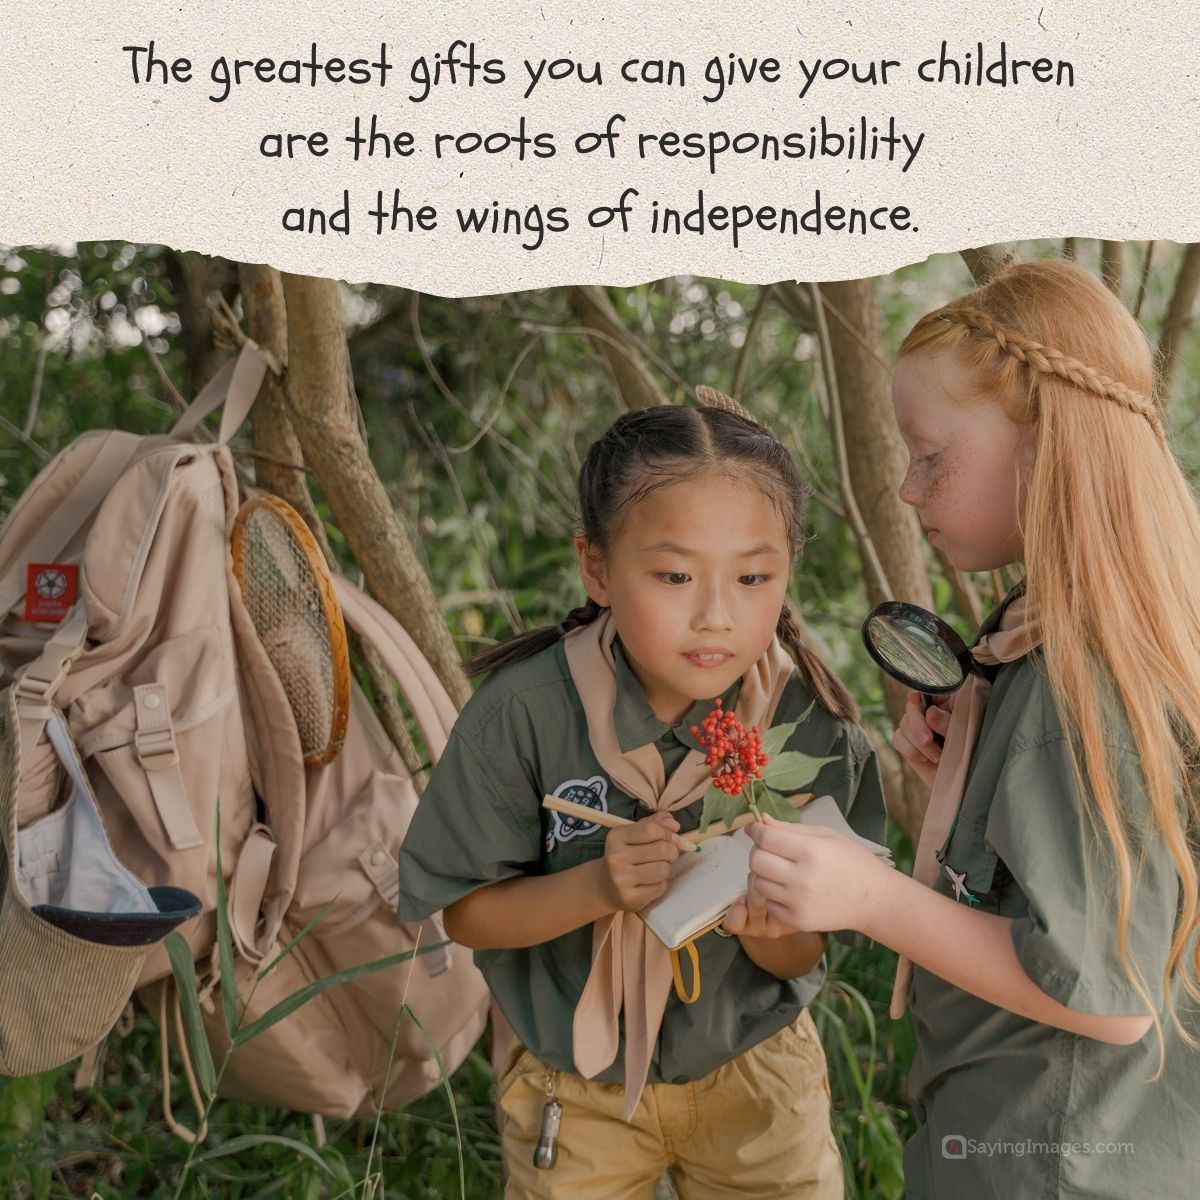 The greatest gifts you can give your children are the roots of responsibility